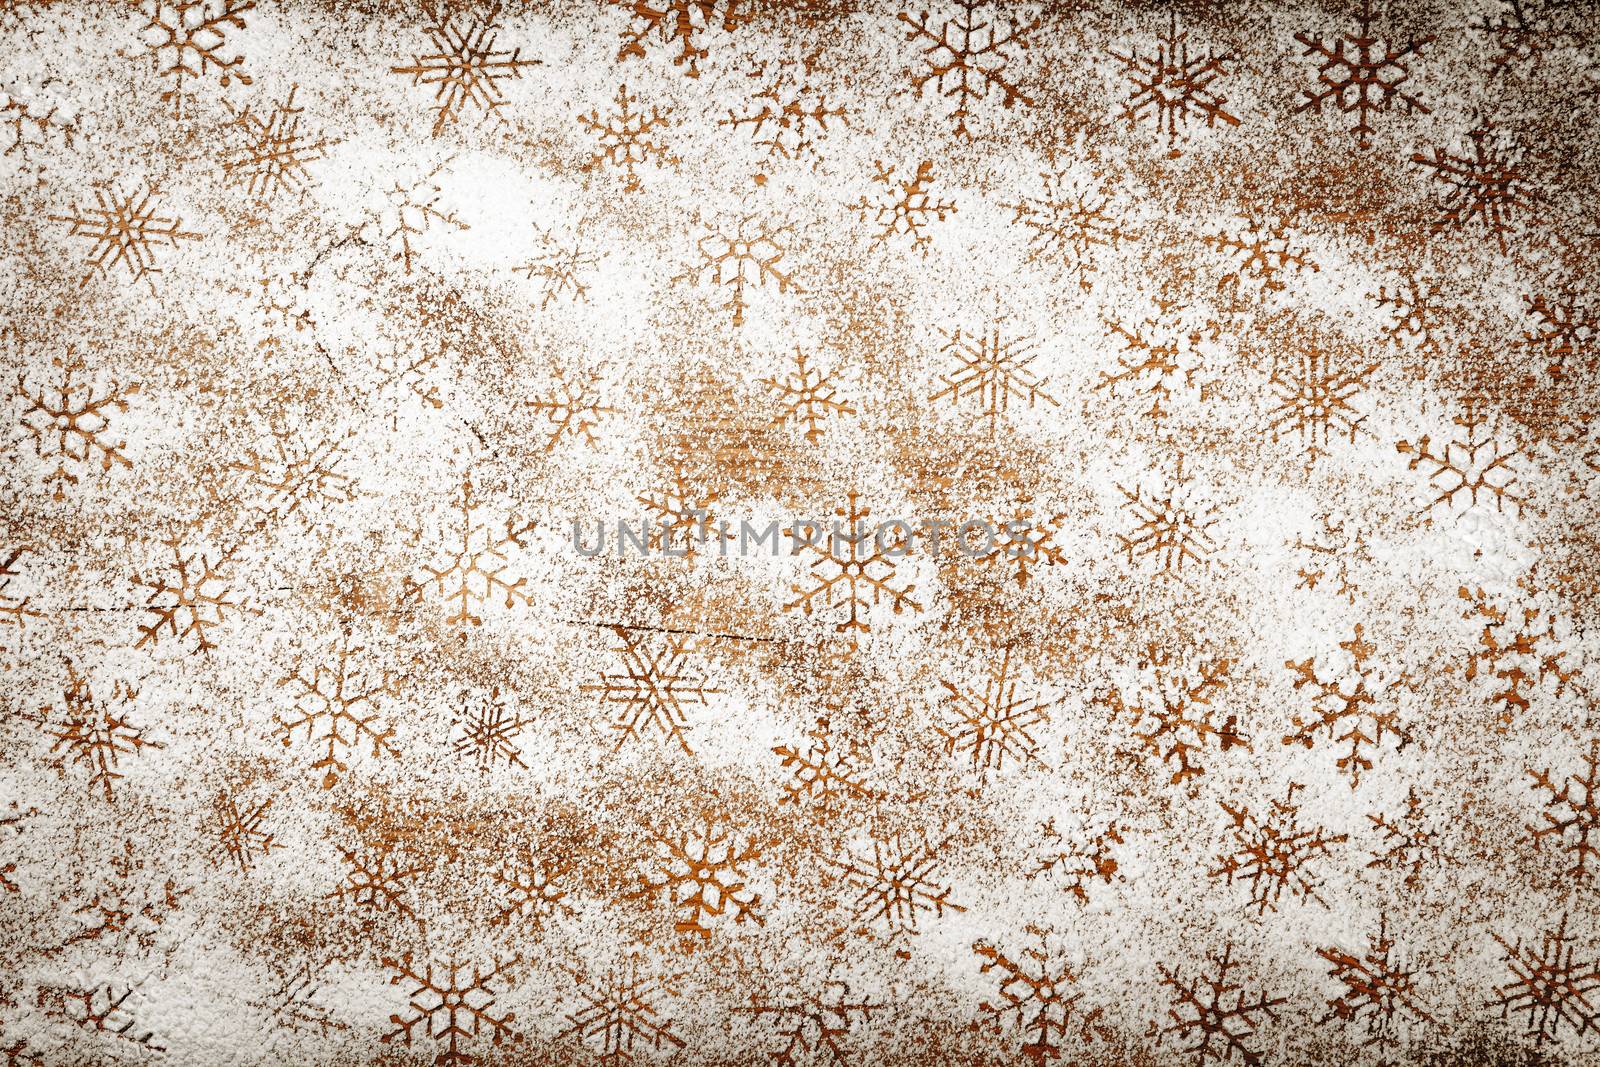 Winter background with snowflakes for Christmas. Snowflake pattern made of icing sugar on wooden table. Top view